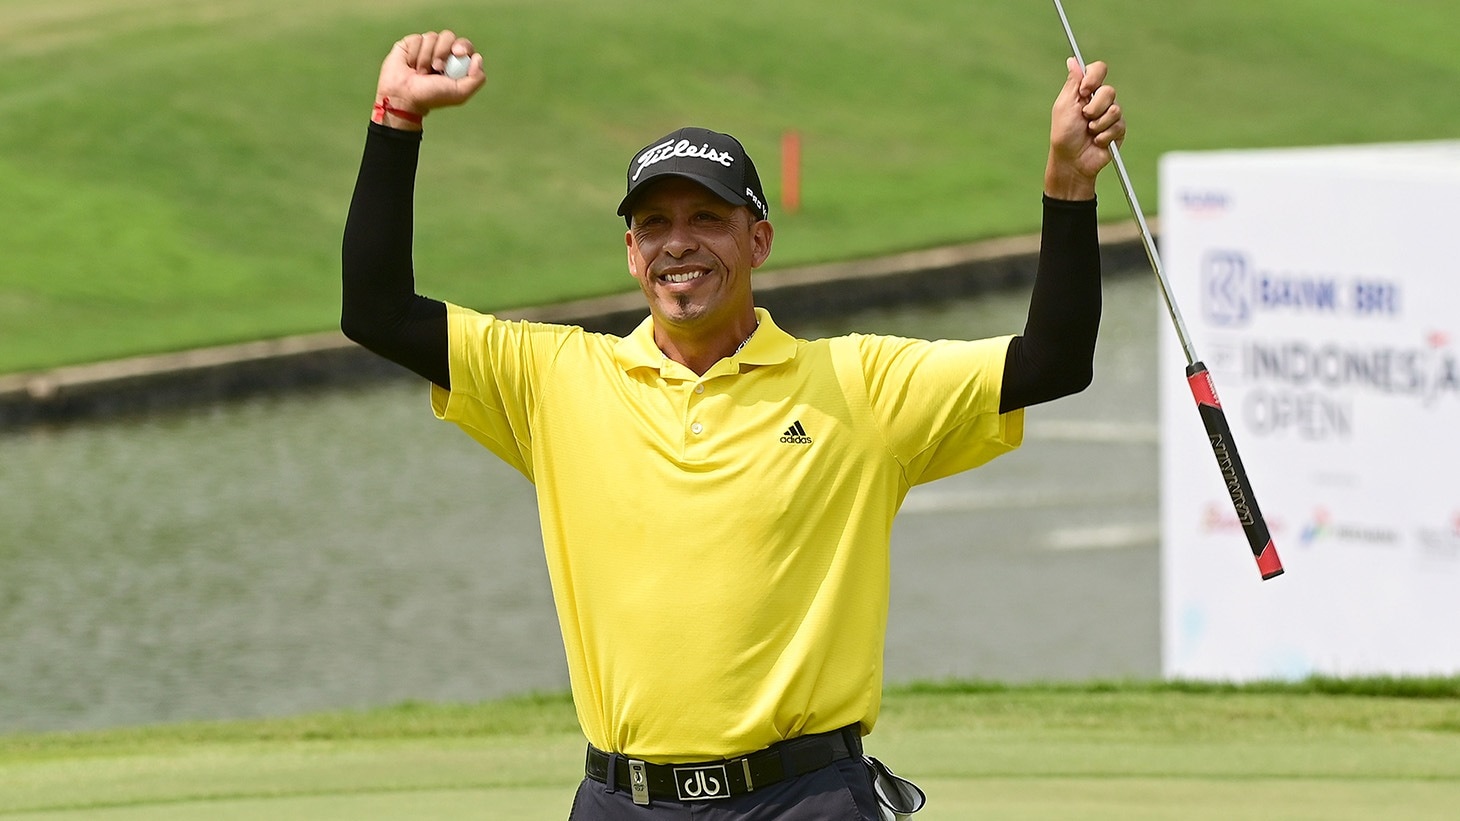 Miguel Carballo raises his arms in victory after holing the winning putt with his Pro V1 golf ball at the 2019 BRI Indonesia Open